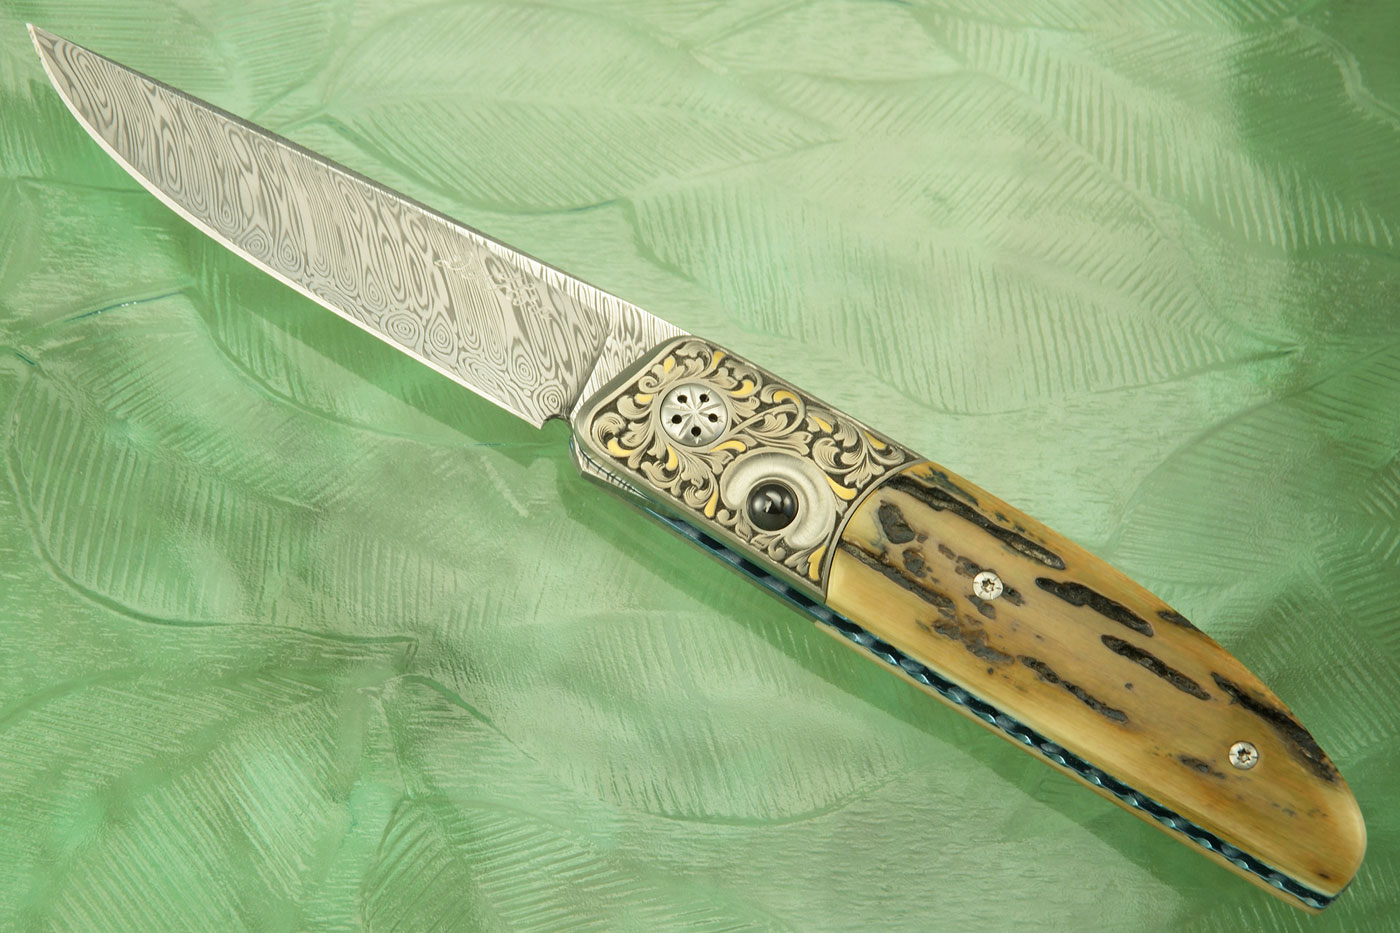 Small Ball Release Front Flipper with Mammoth Ivory and Engraved Zirconium